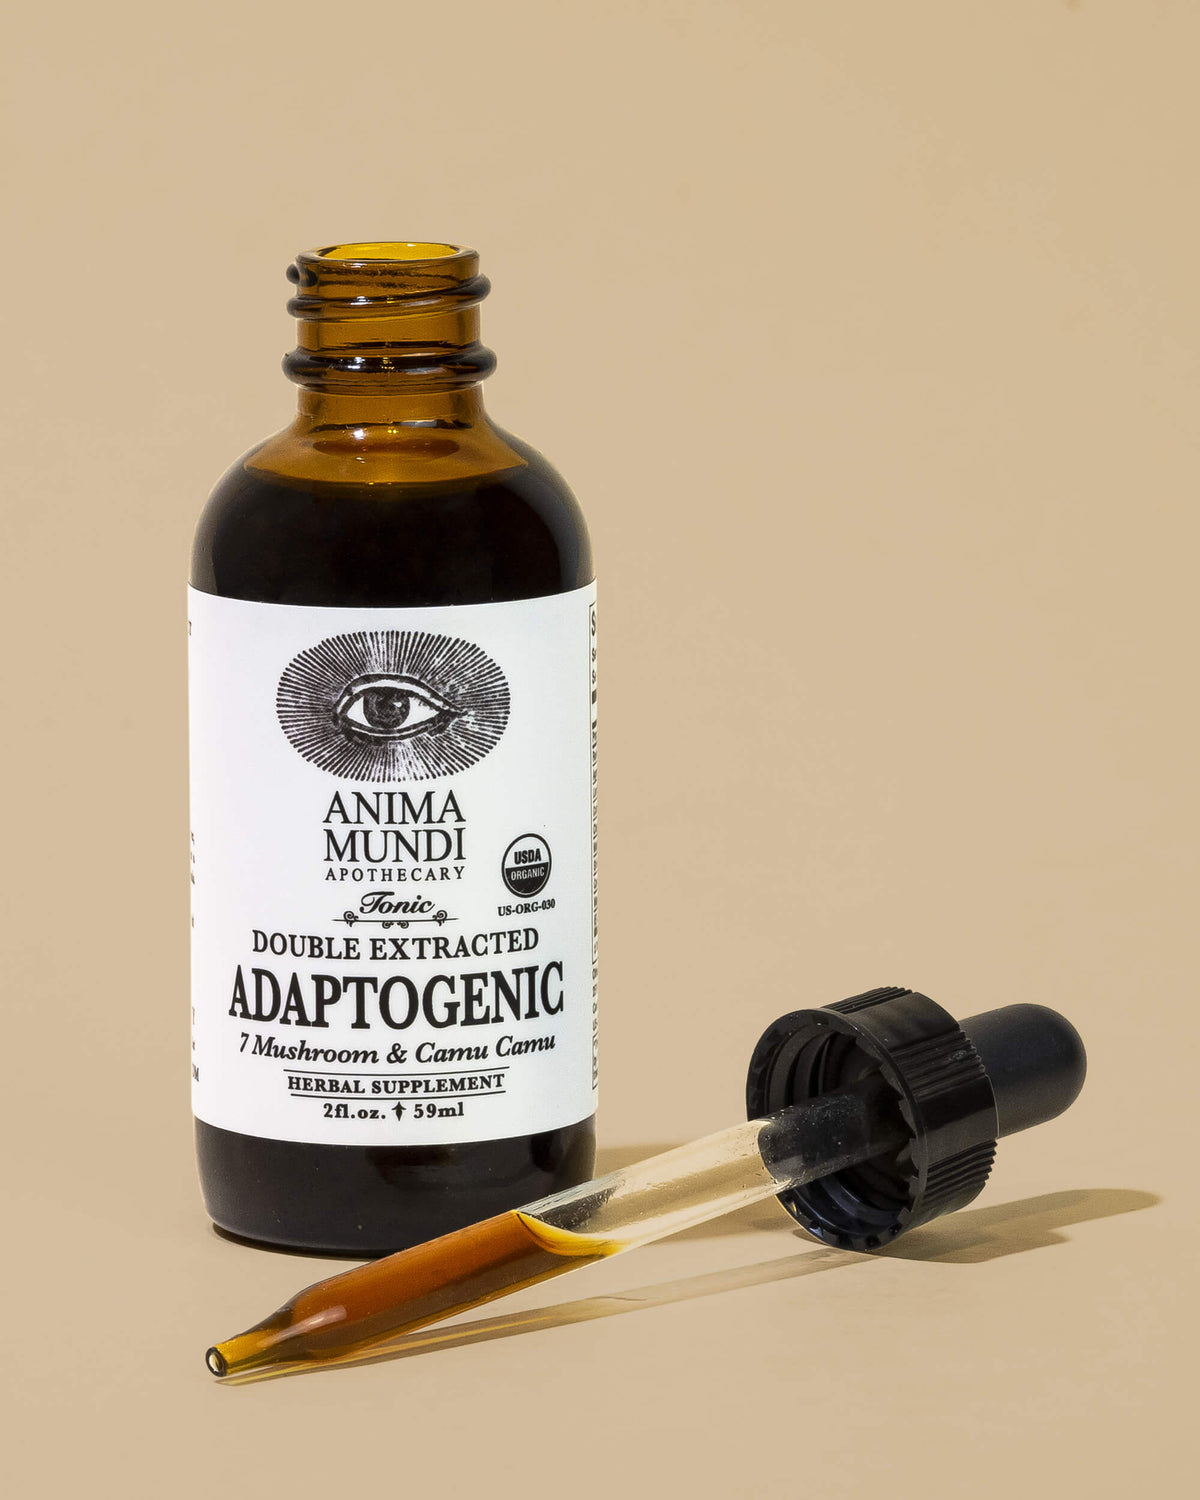 anima mundi adaptogenic tonic mushroom tinture / Adaptogenic Tonic contains locally grown, double cell wall extracted mushrooms along with high vitamin C sources such as Camu Camu and Mangosteen, which can help empower and rewire the immune system.